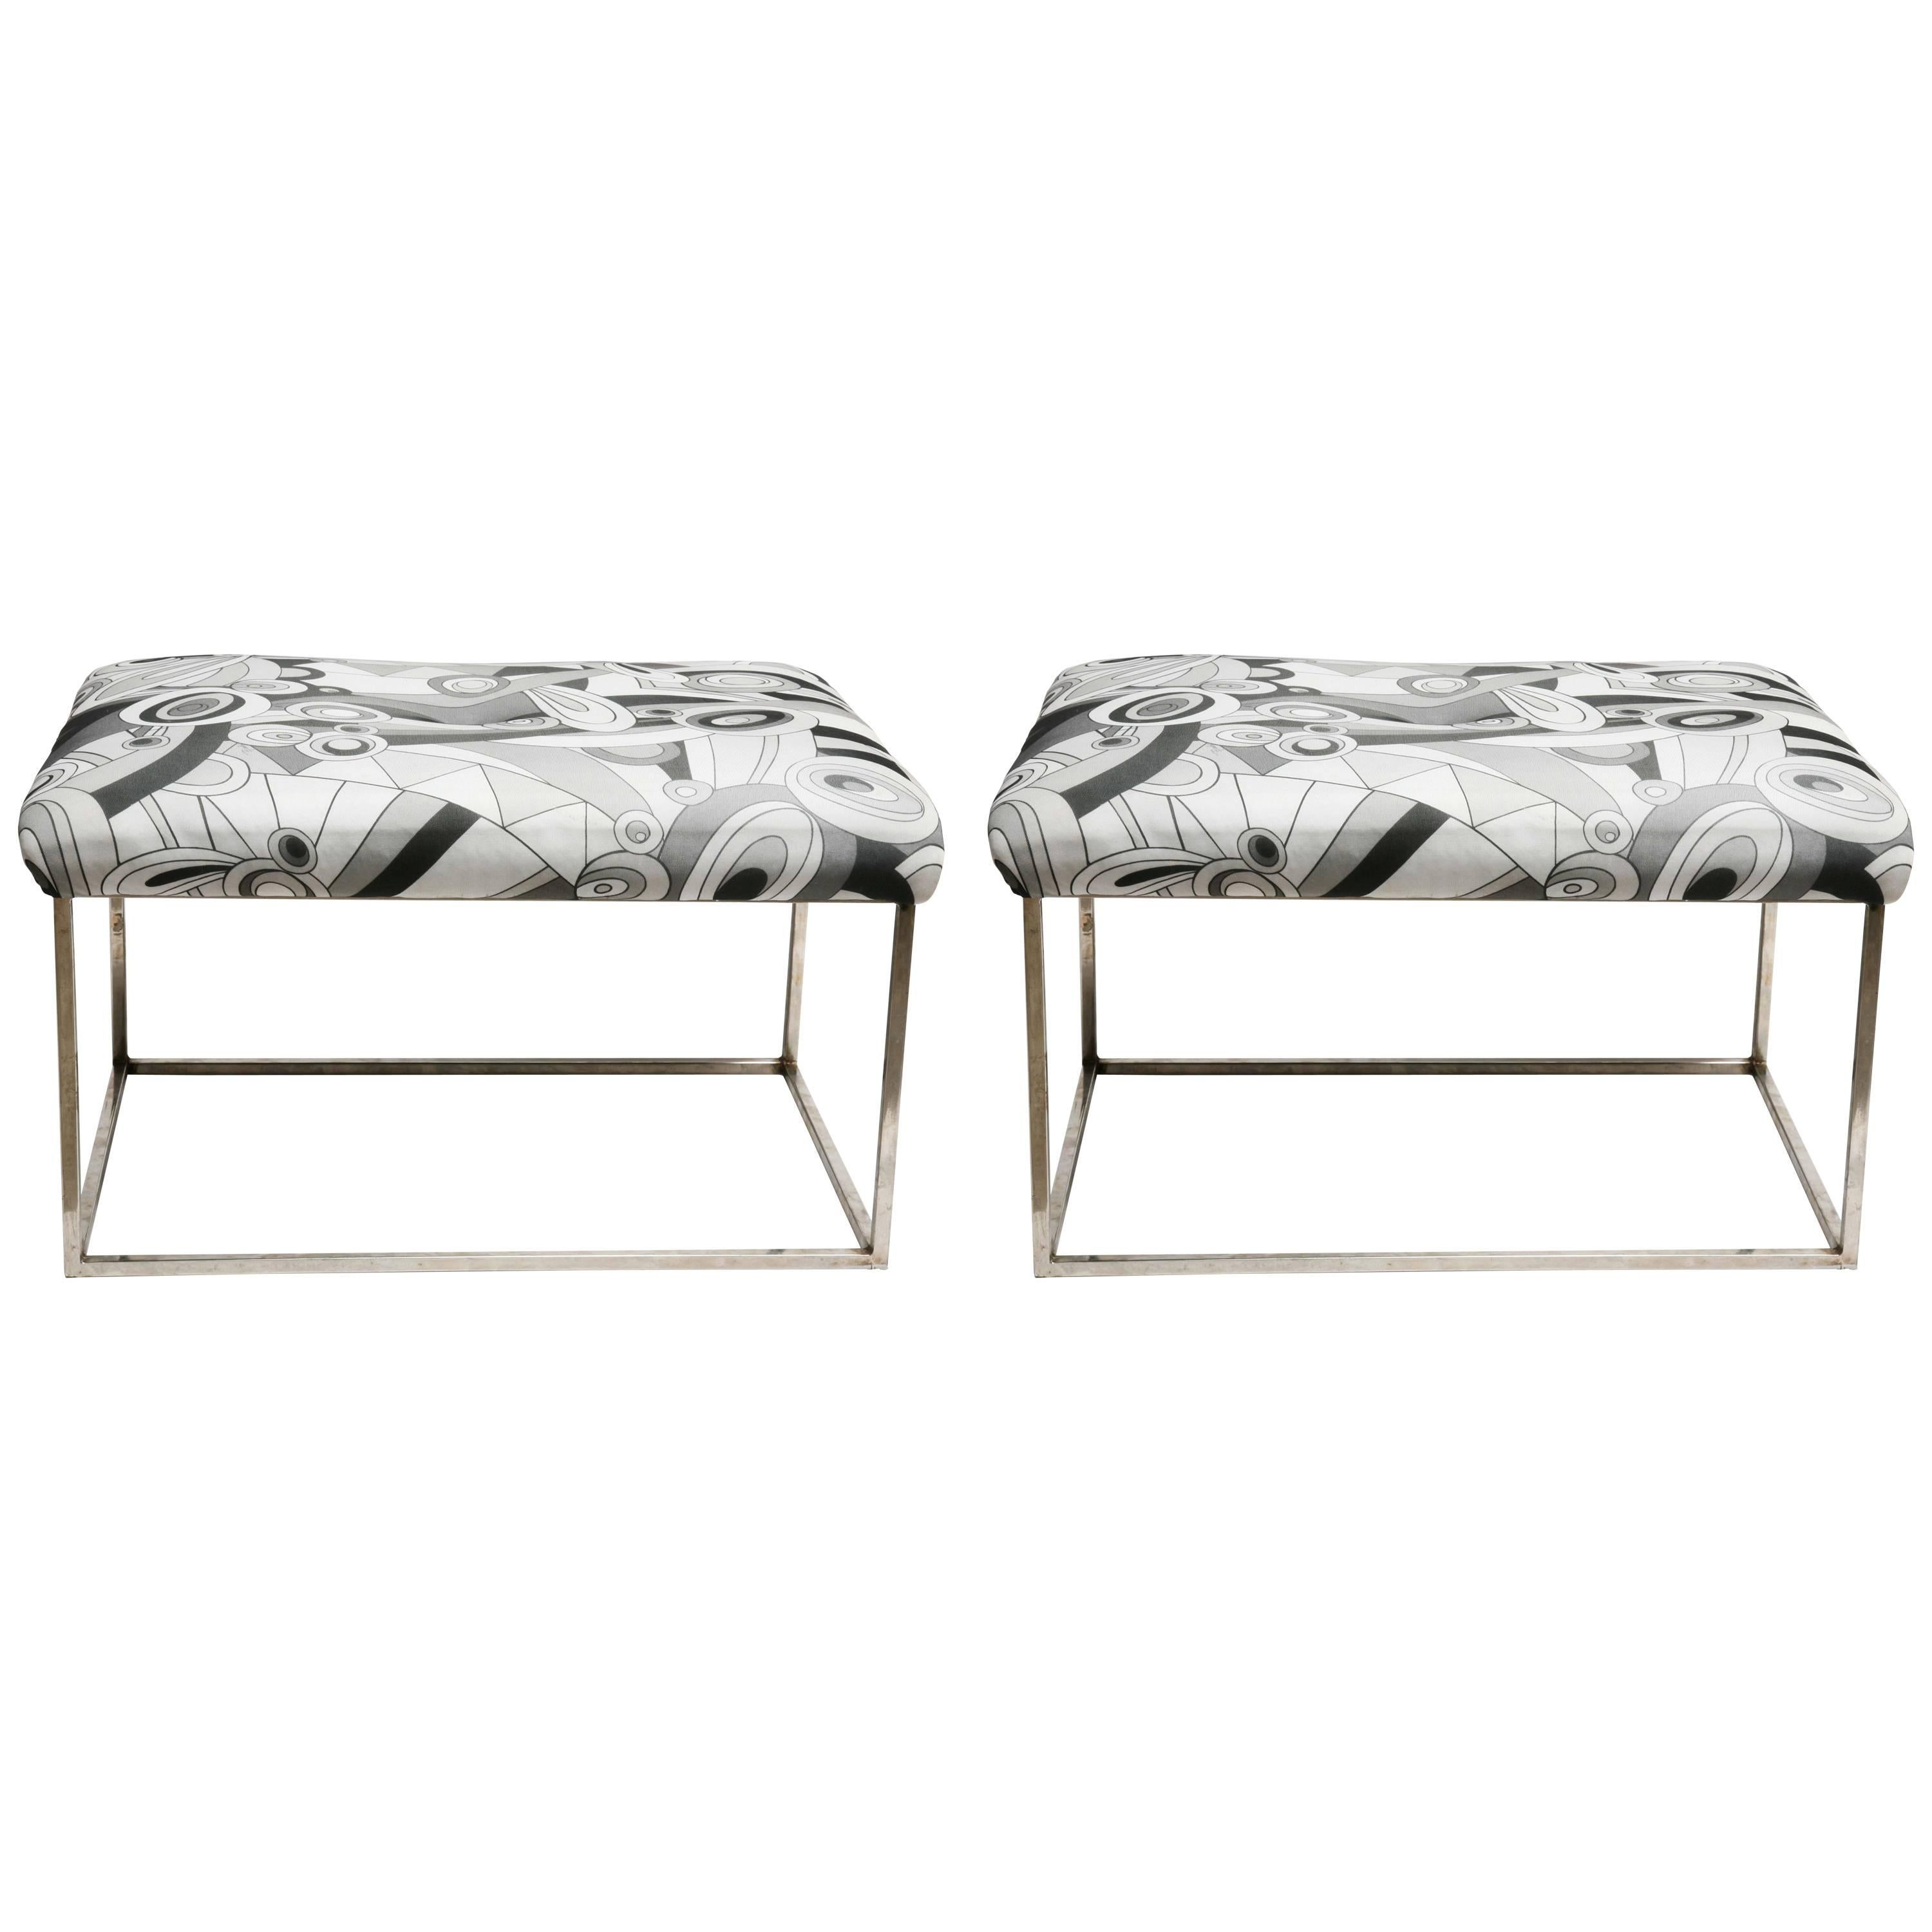 Pair of Mid-Century Modern Baughman Chrome Pucci Fabric Stools or Benches For Sale